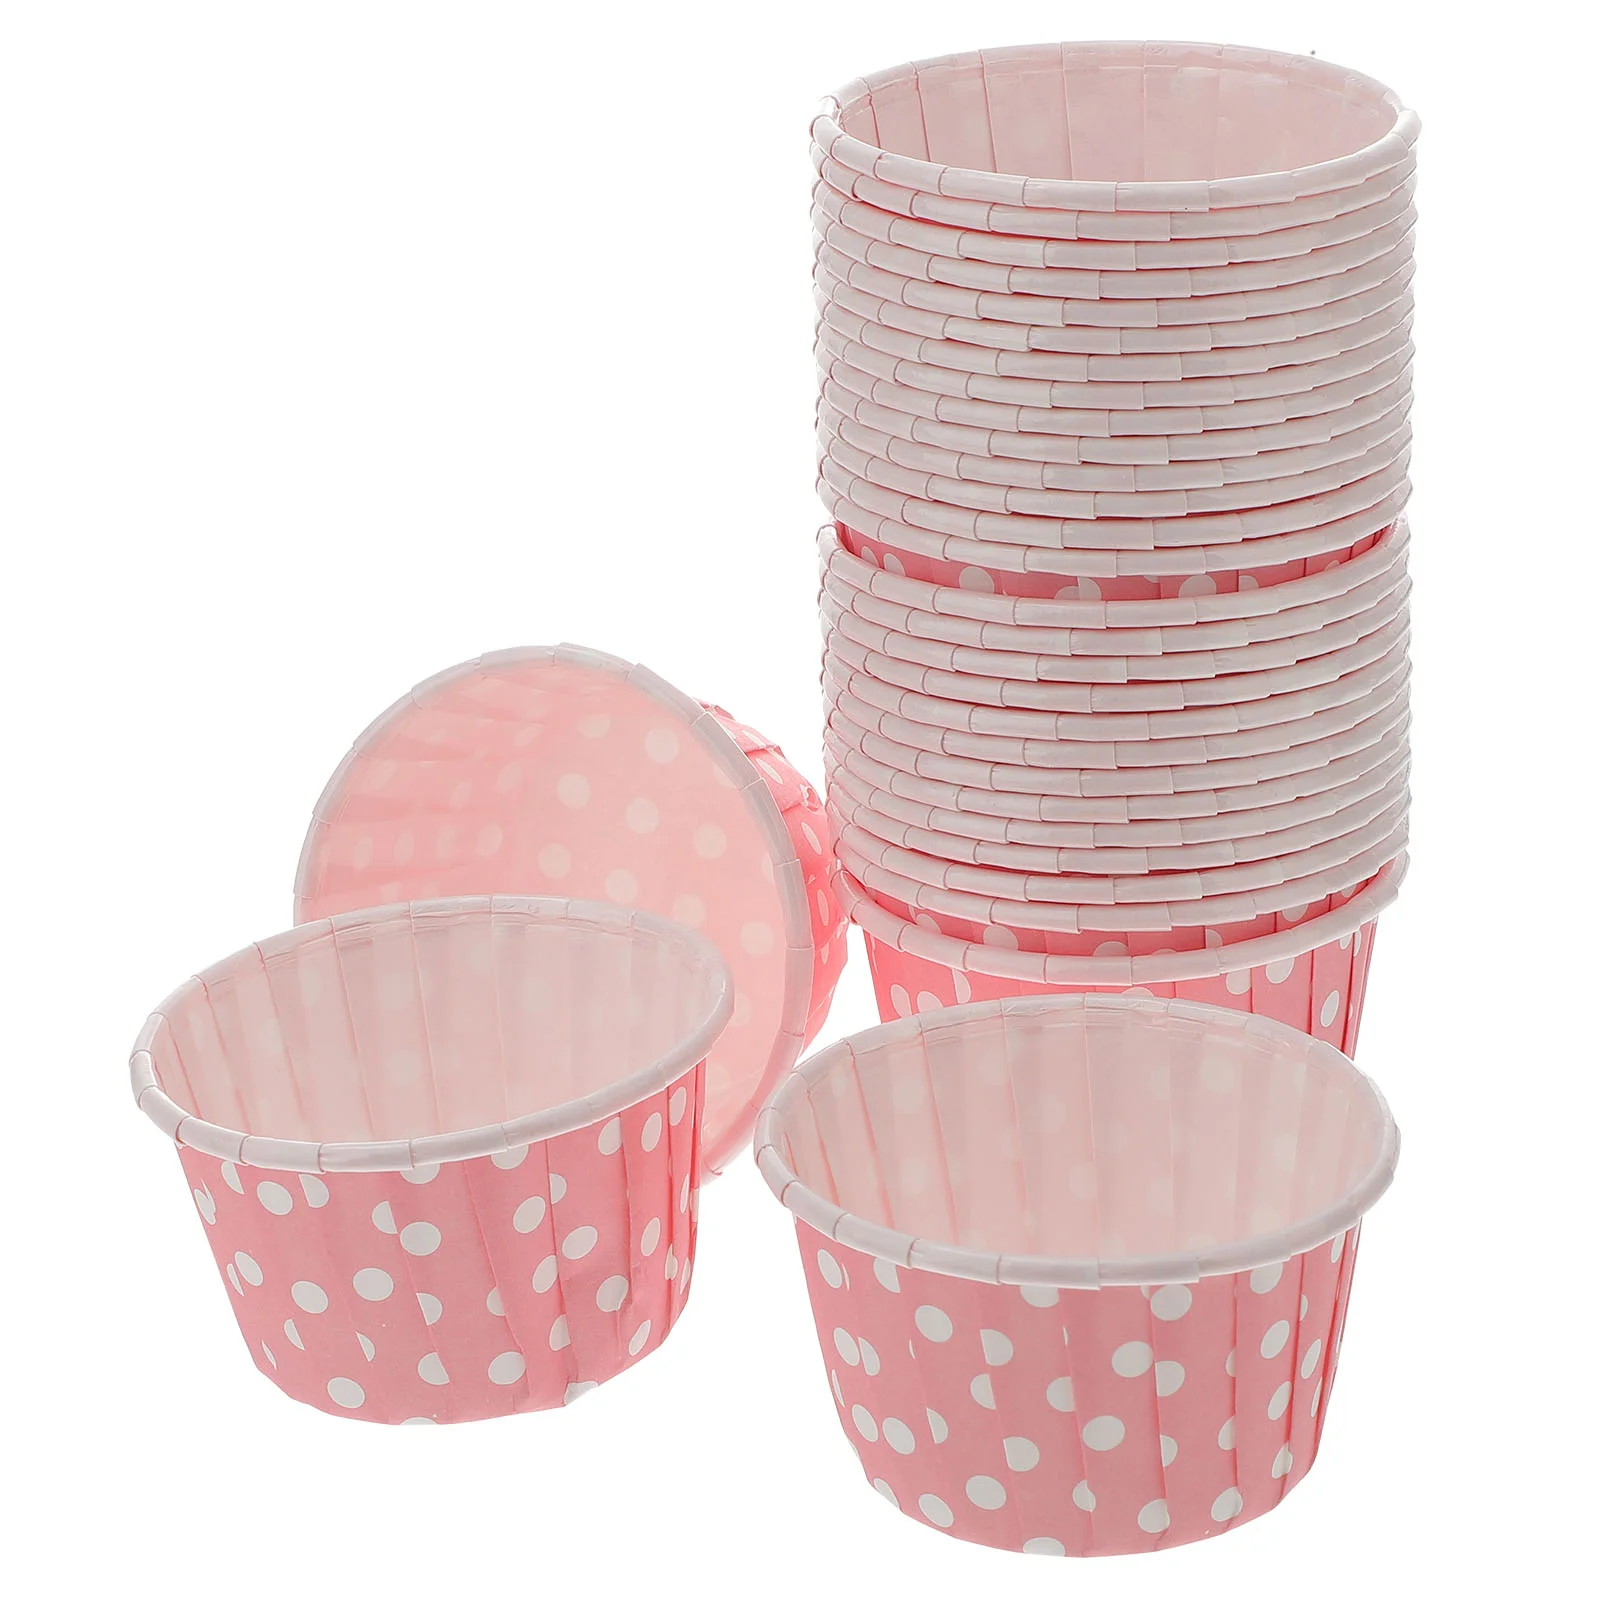 https://ae01.alicdn.com/kf/S011872848eb14941801a9a25eaf125bb7/50-Pcs-Ice-Cream-Cups-Cupcake-Containers-Ice-Cream-Bowls-Jelly-Cup-Togo-Containers-Paper-Disposable.jpg